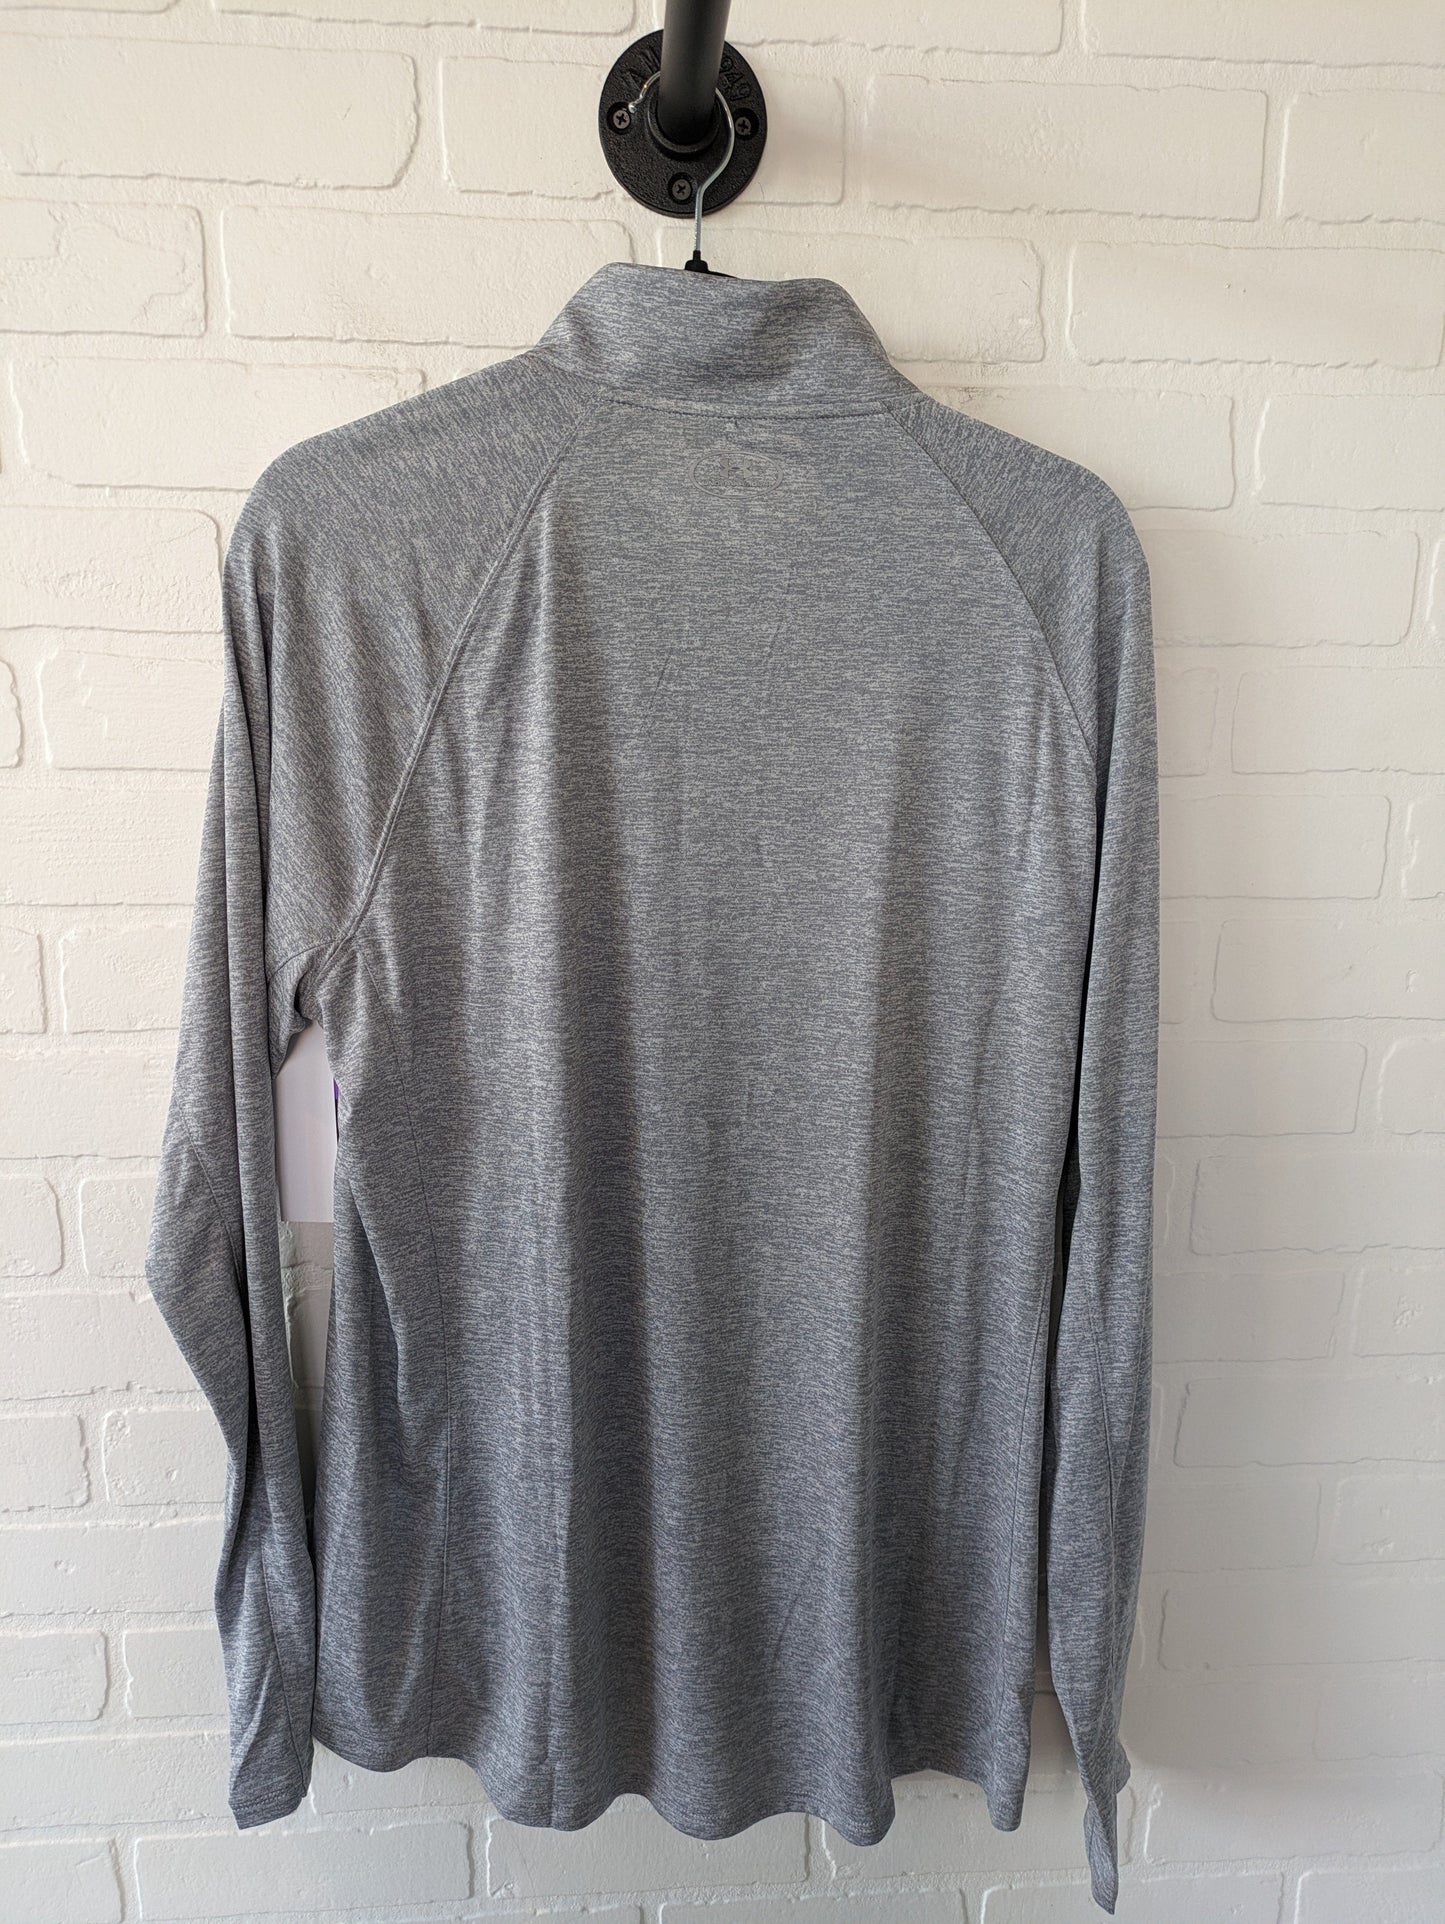 Athletic Top Long Sleeve Collar By Under Armour  Size: 2x